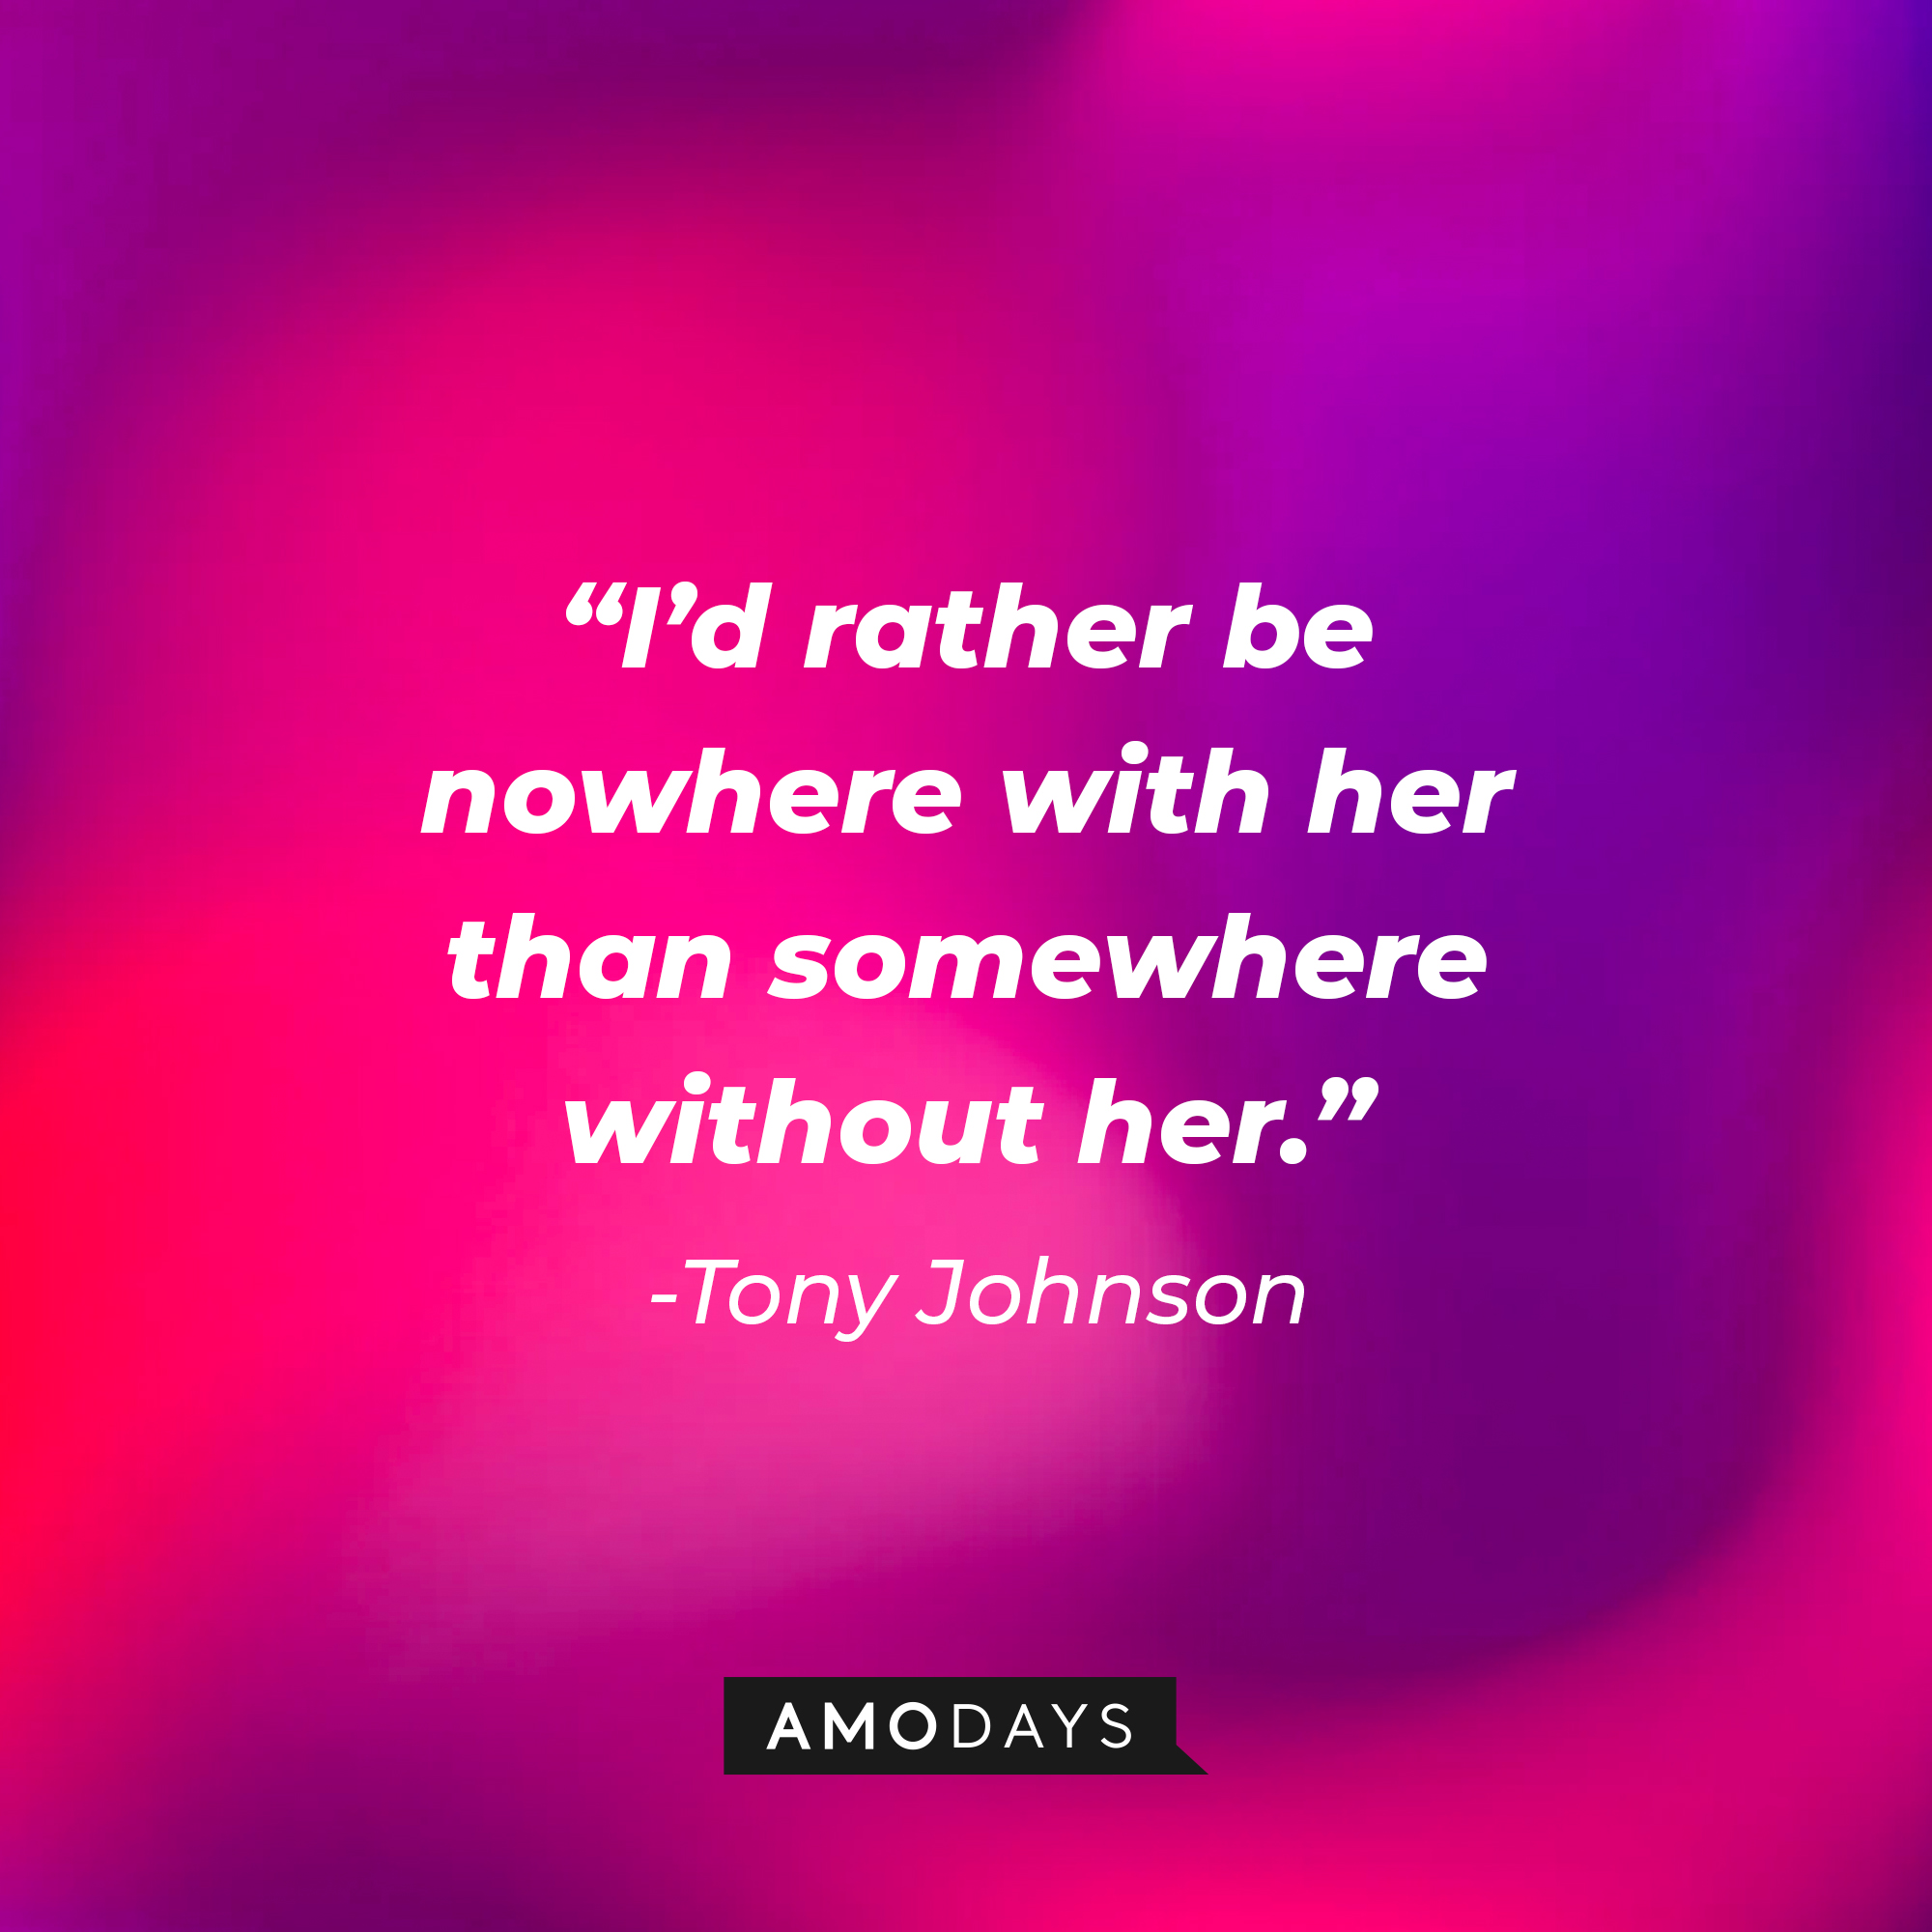 Tony Johnson’s quote: “I’d rather be nowhere with her than somewhere without her.”  |  Source: AmoDays